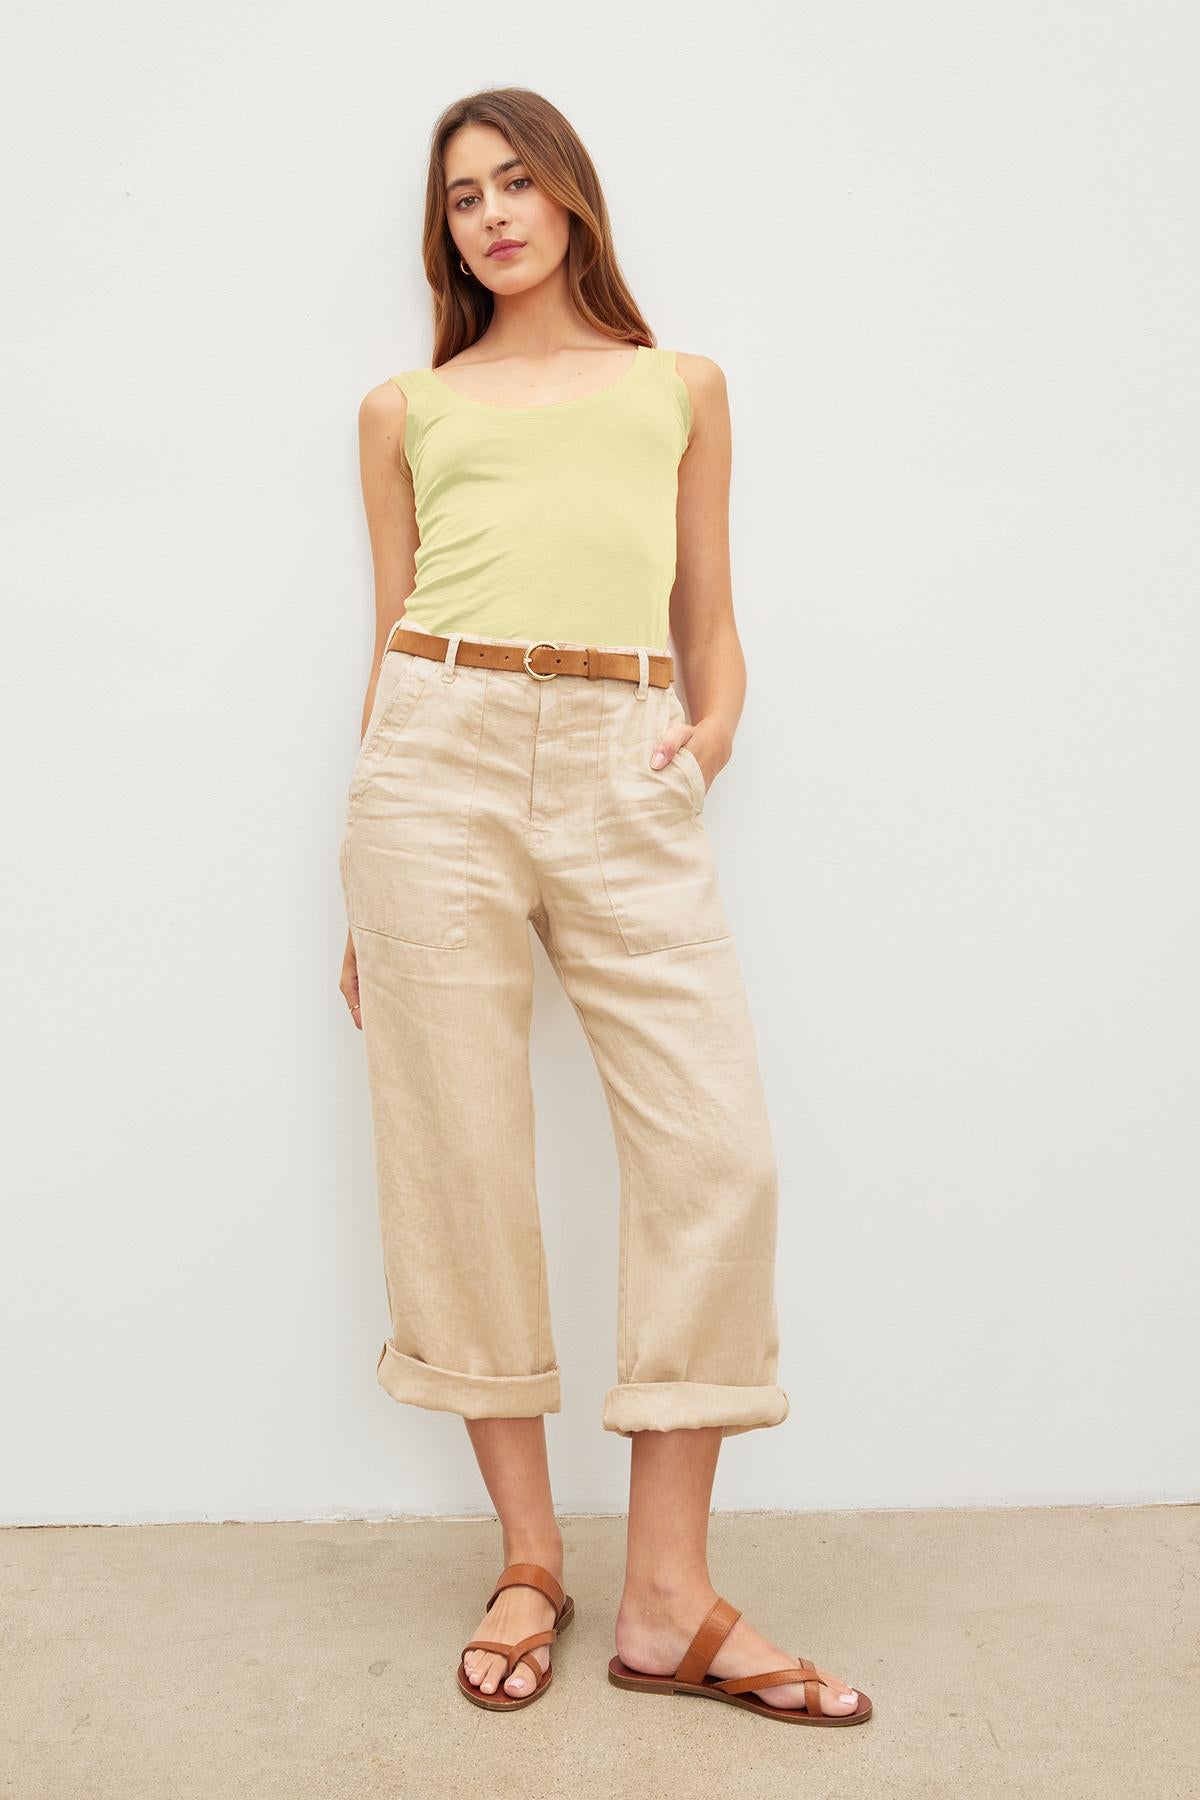   A woman stands posing in a Velvet by Graham & Spencer yellow MOSSY GAUZY WHISPER FITTED TANK, beige cropped pants with a belt, and brown sandals against a plain white background. 